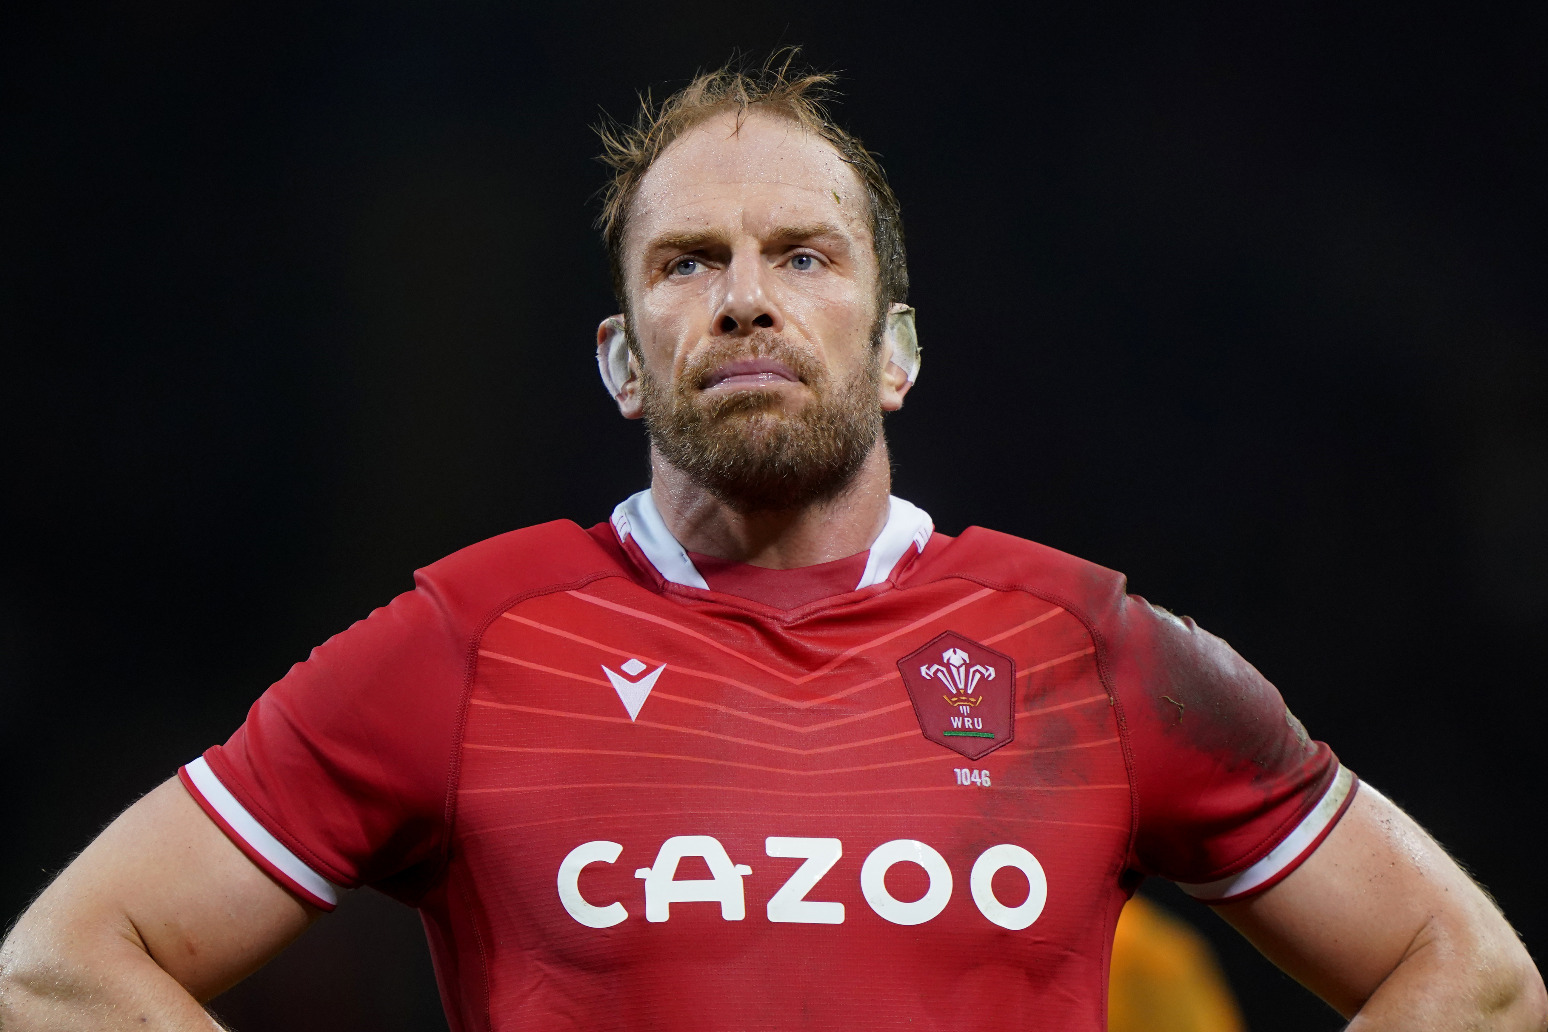 Alun Wyn Jones available against Scotland after head injury concerns 